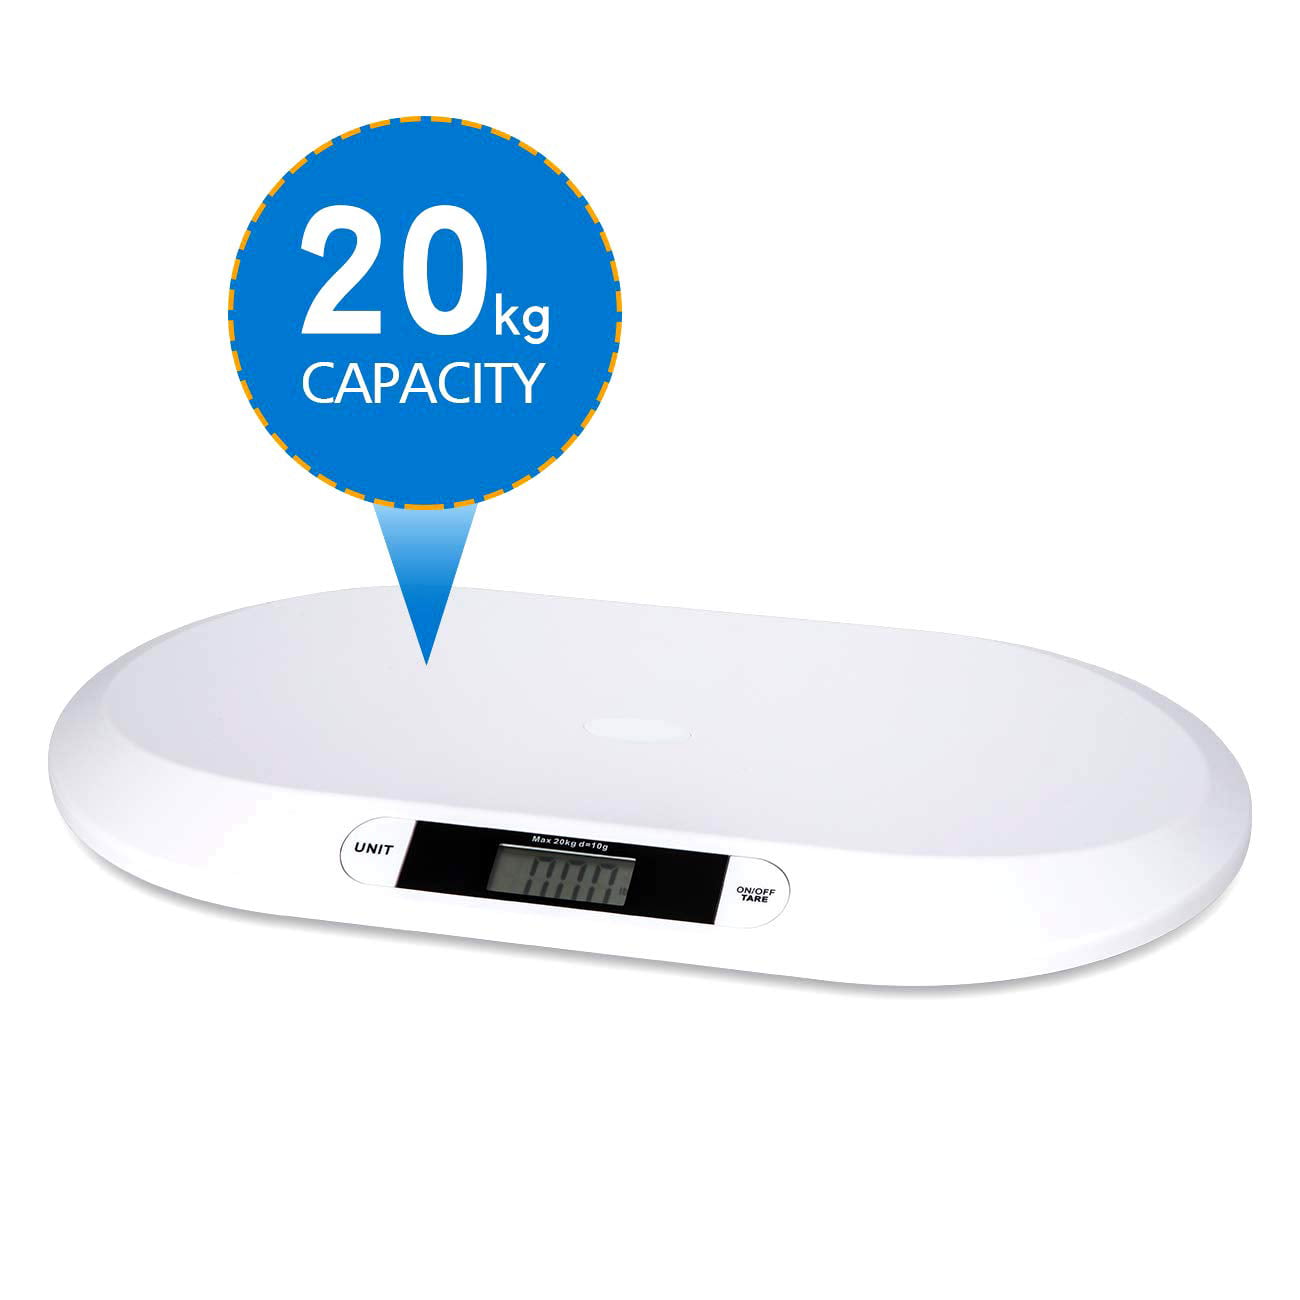 TANITA Baby Scale Digital 44 lbs. X 1 oz. White Batteries SCALE, DIGITAL  BABY/INF 44LB CAPACITY Used Plus Carrying Case